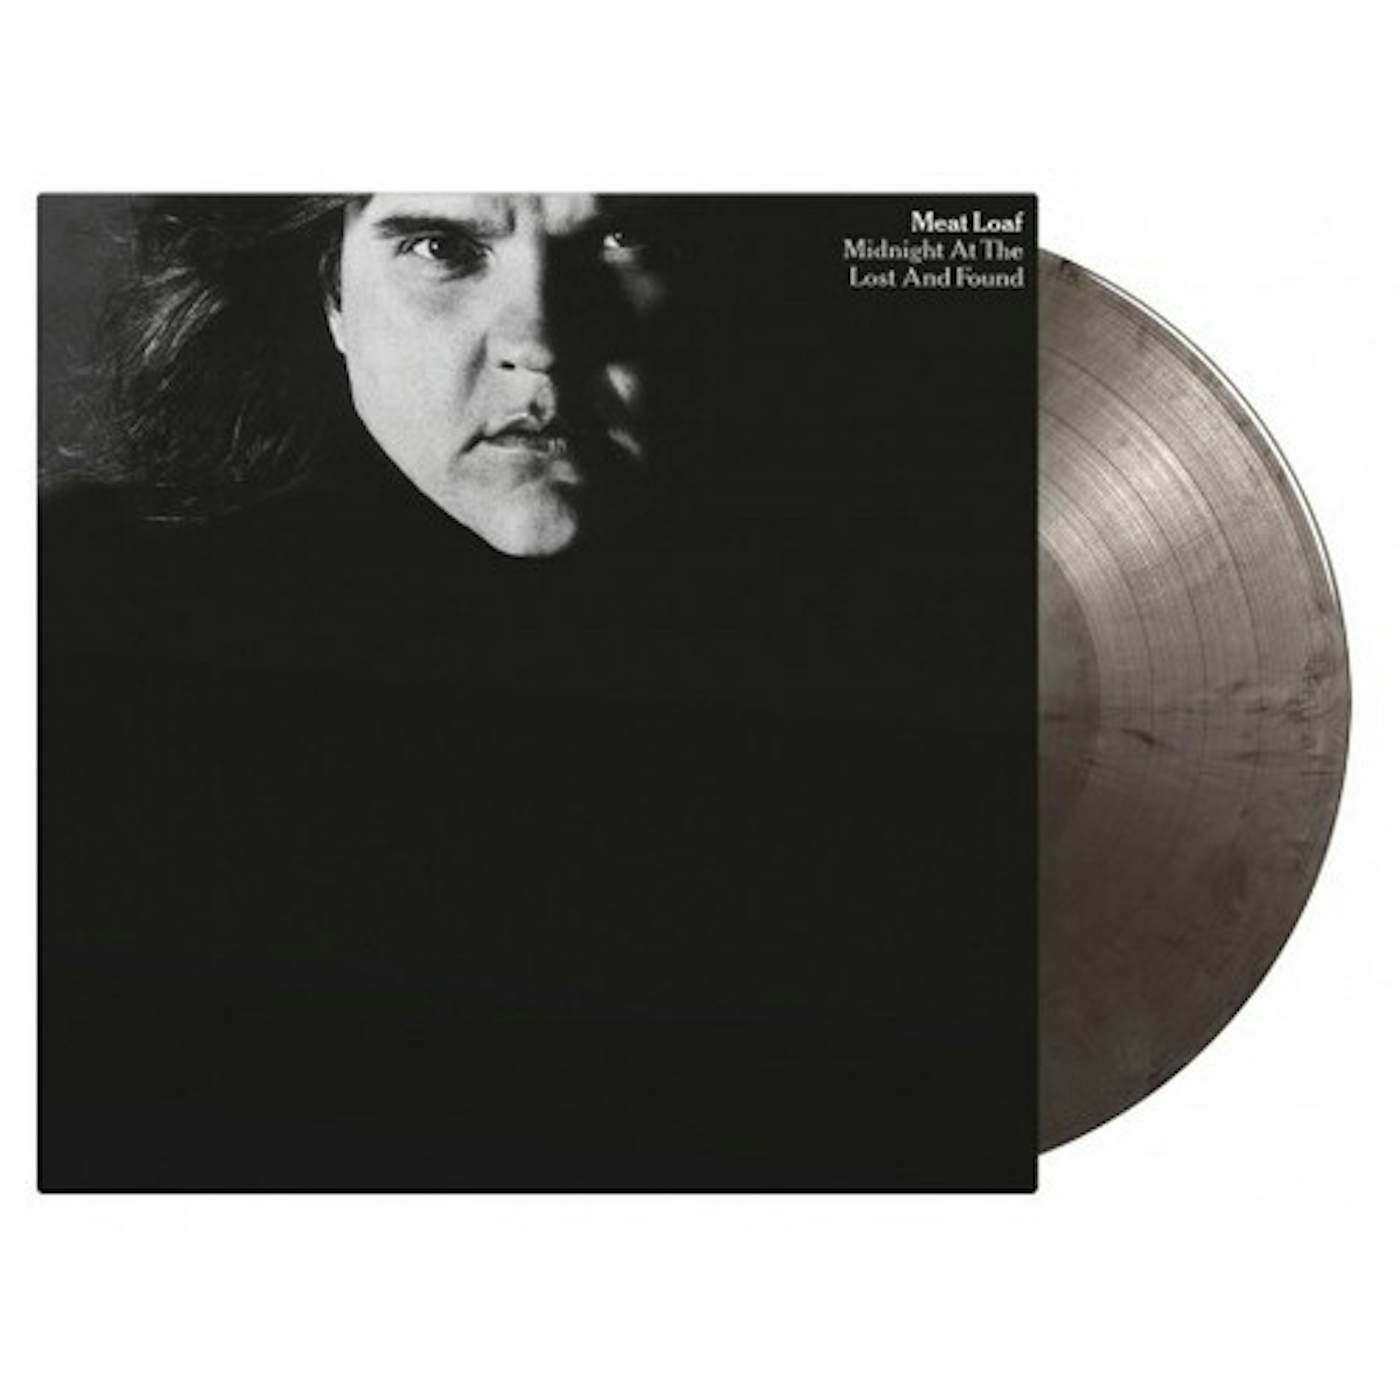 Meat Loaf Midnight At The Lost And Found Vinyl Record